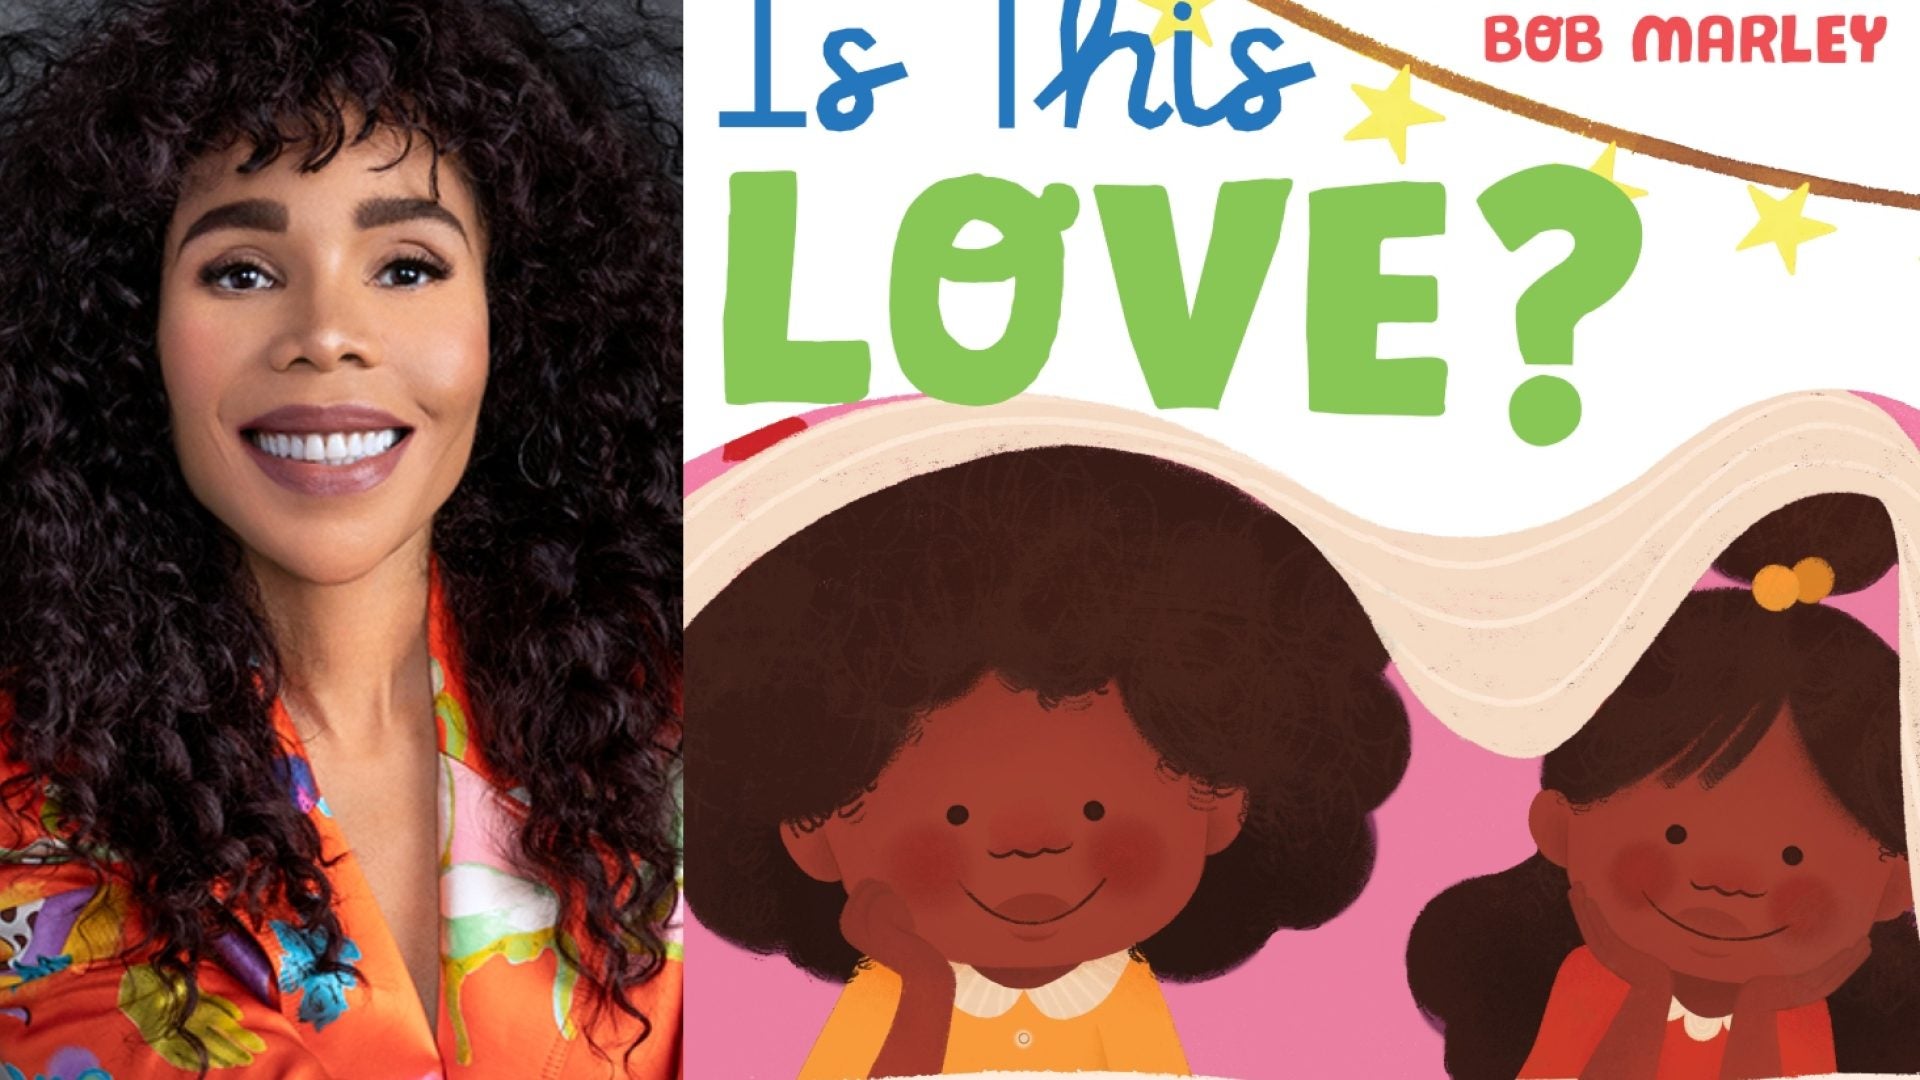 Cedella Marley On Her Father's Enduring Legacy And The Beauty Of Sibling Bonds In New Children’s Book ‘Is This Love?’